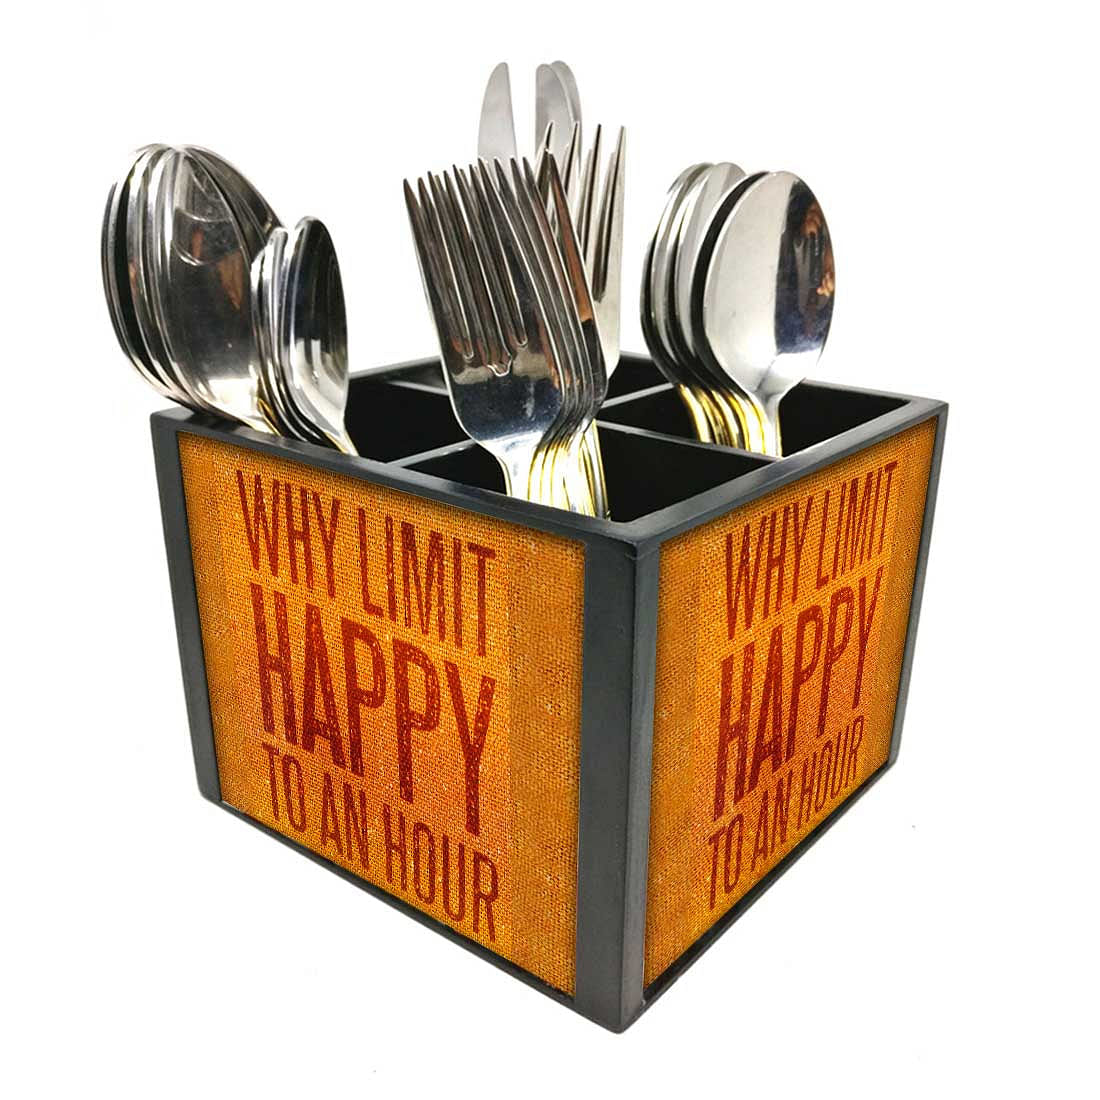 Why Limit Happy Cutlery Holder Stand Silverware Caddy Organizer for Spoons, Forks & Knives-Made of Pinewood Nutcase